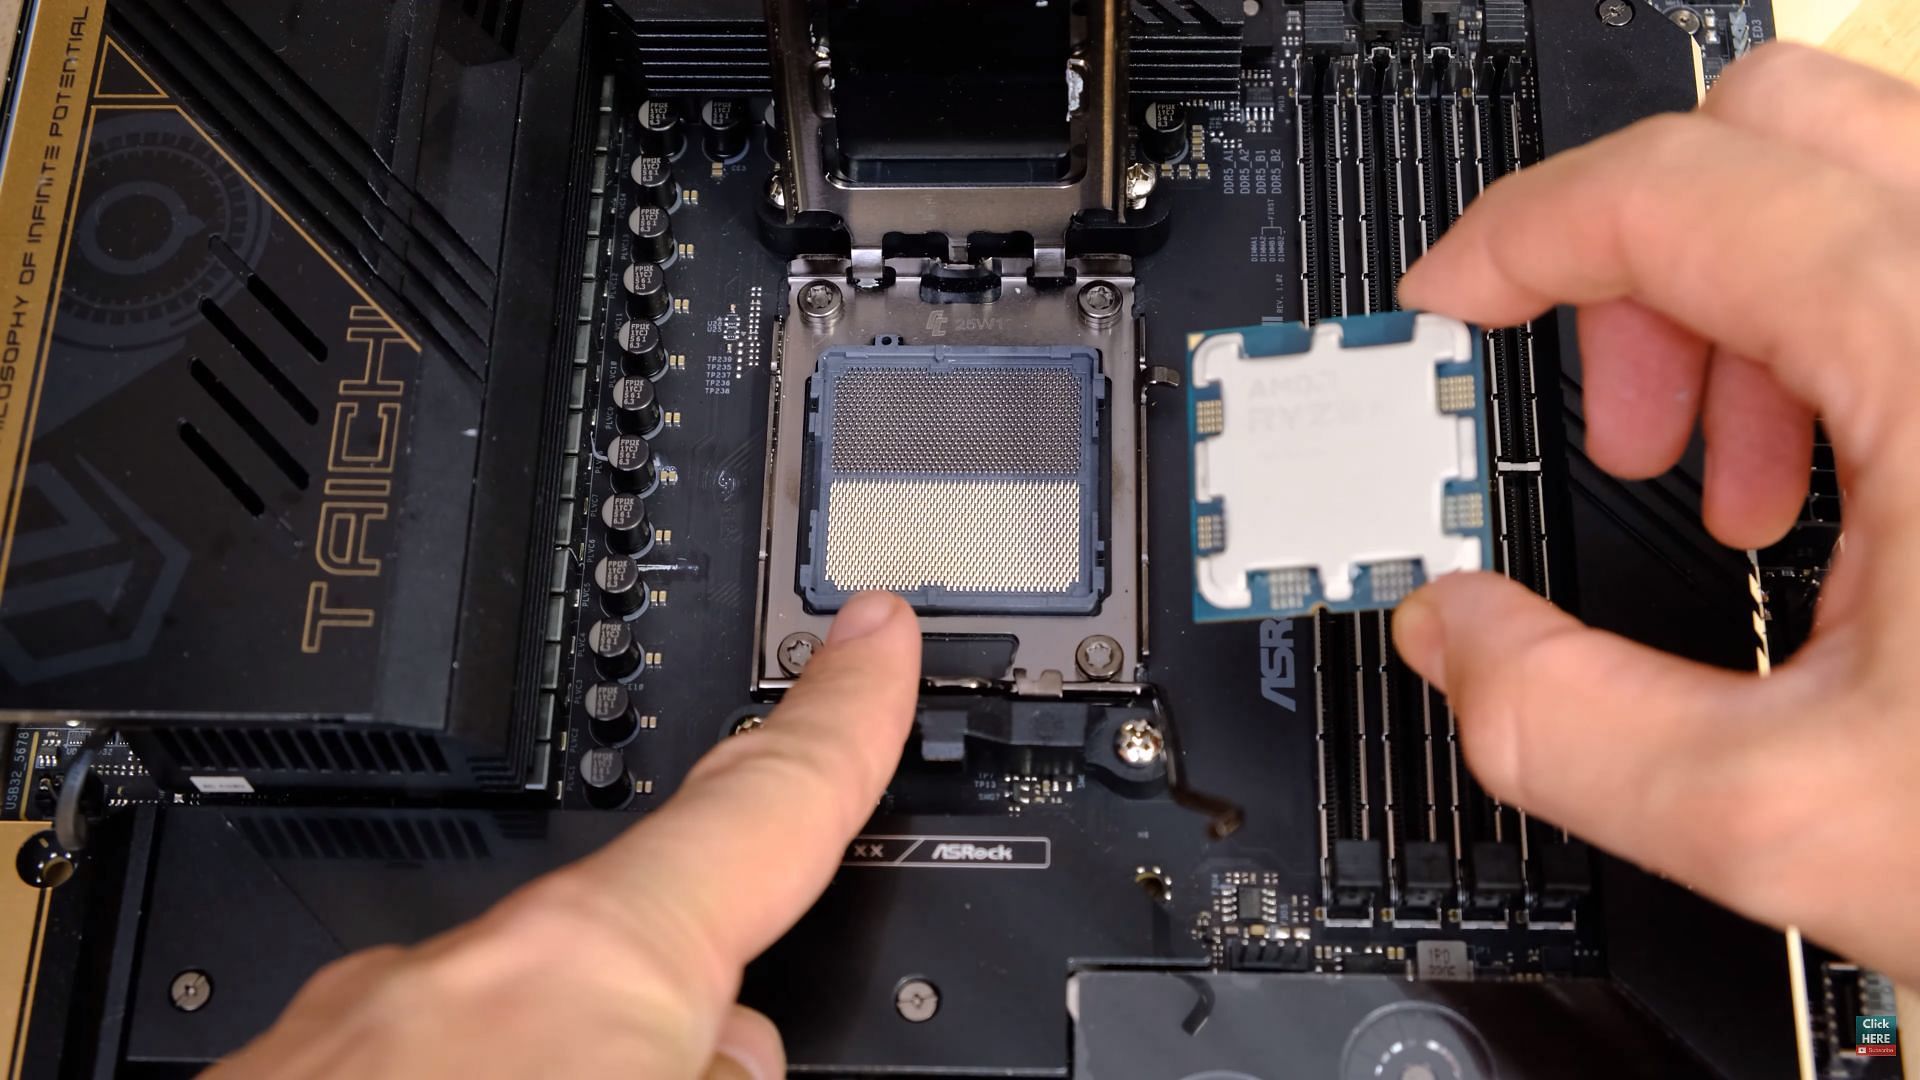 Extra care should be taken to ensure the Ryzen 7000 processor is lined up with the socket correctly (Image via CrazyTechLab/YouTube)